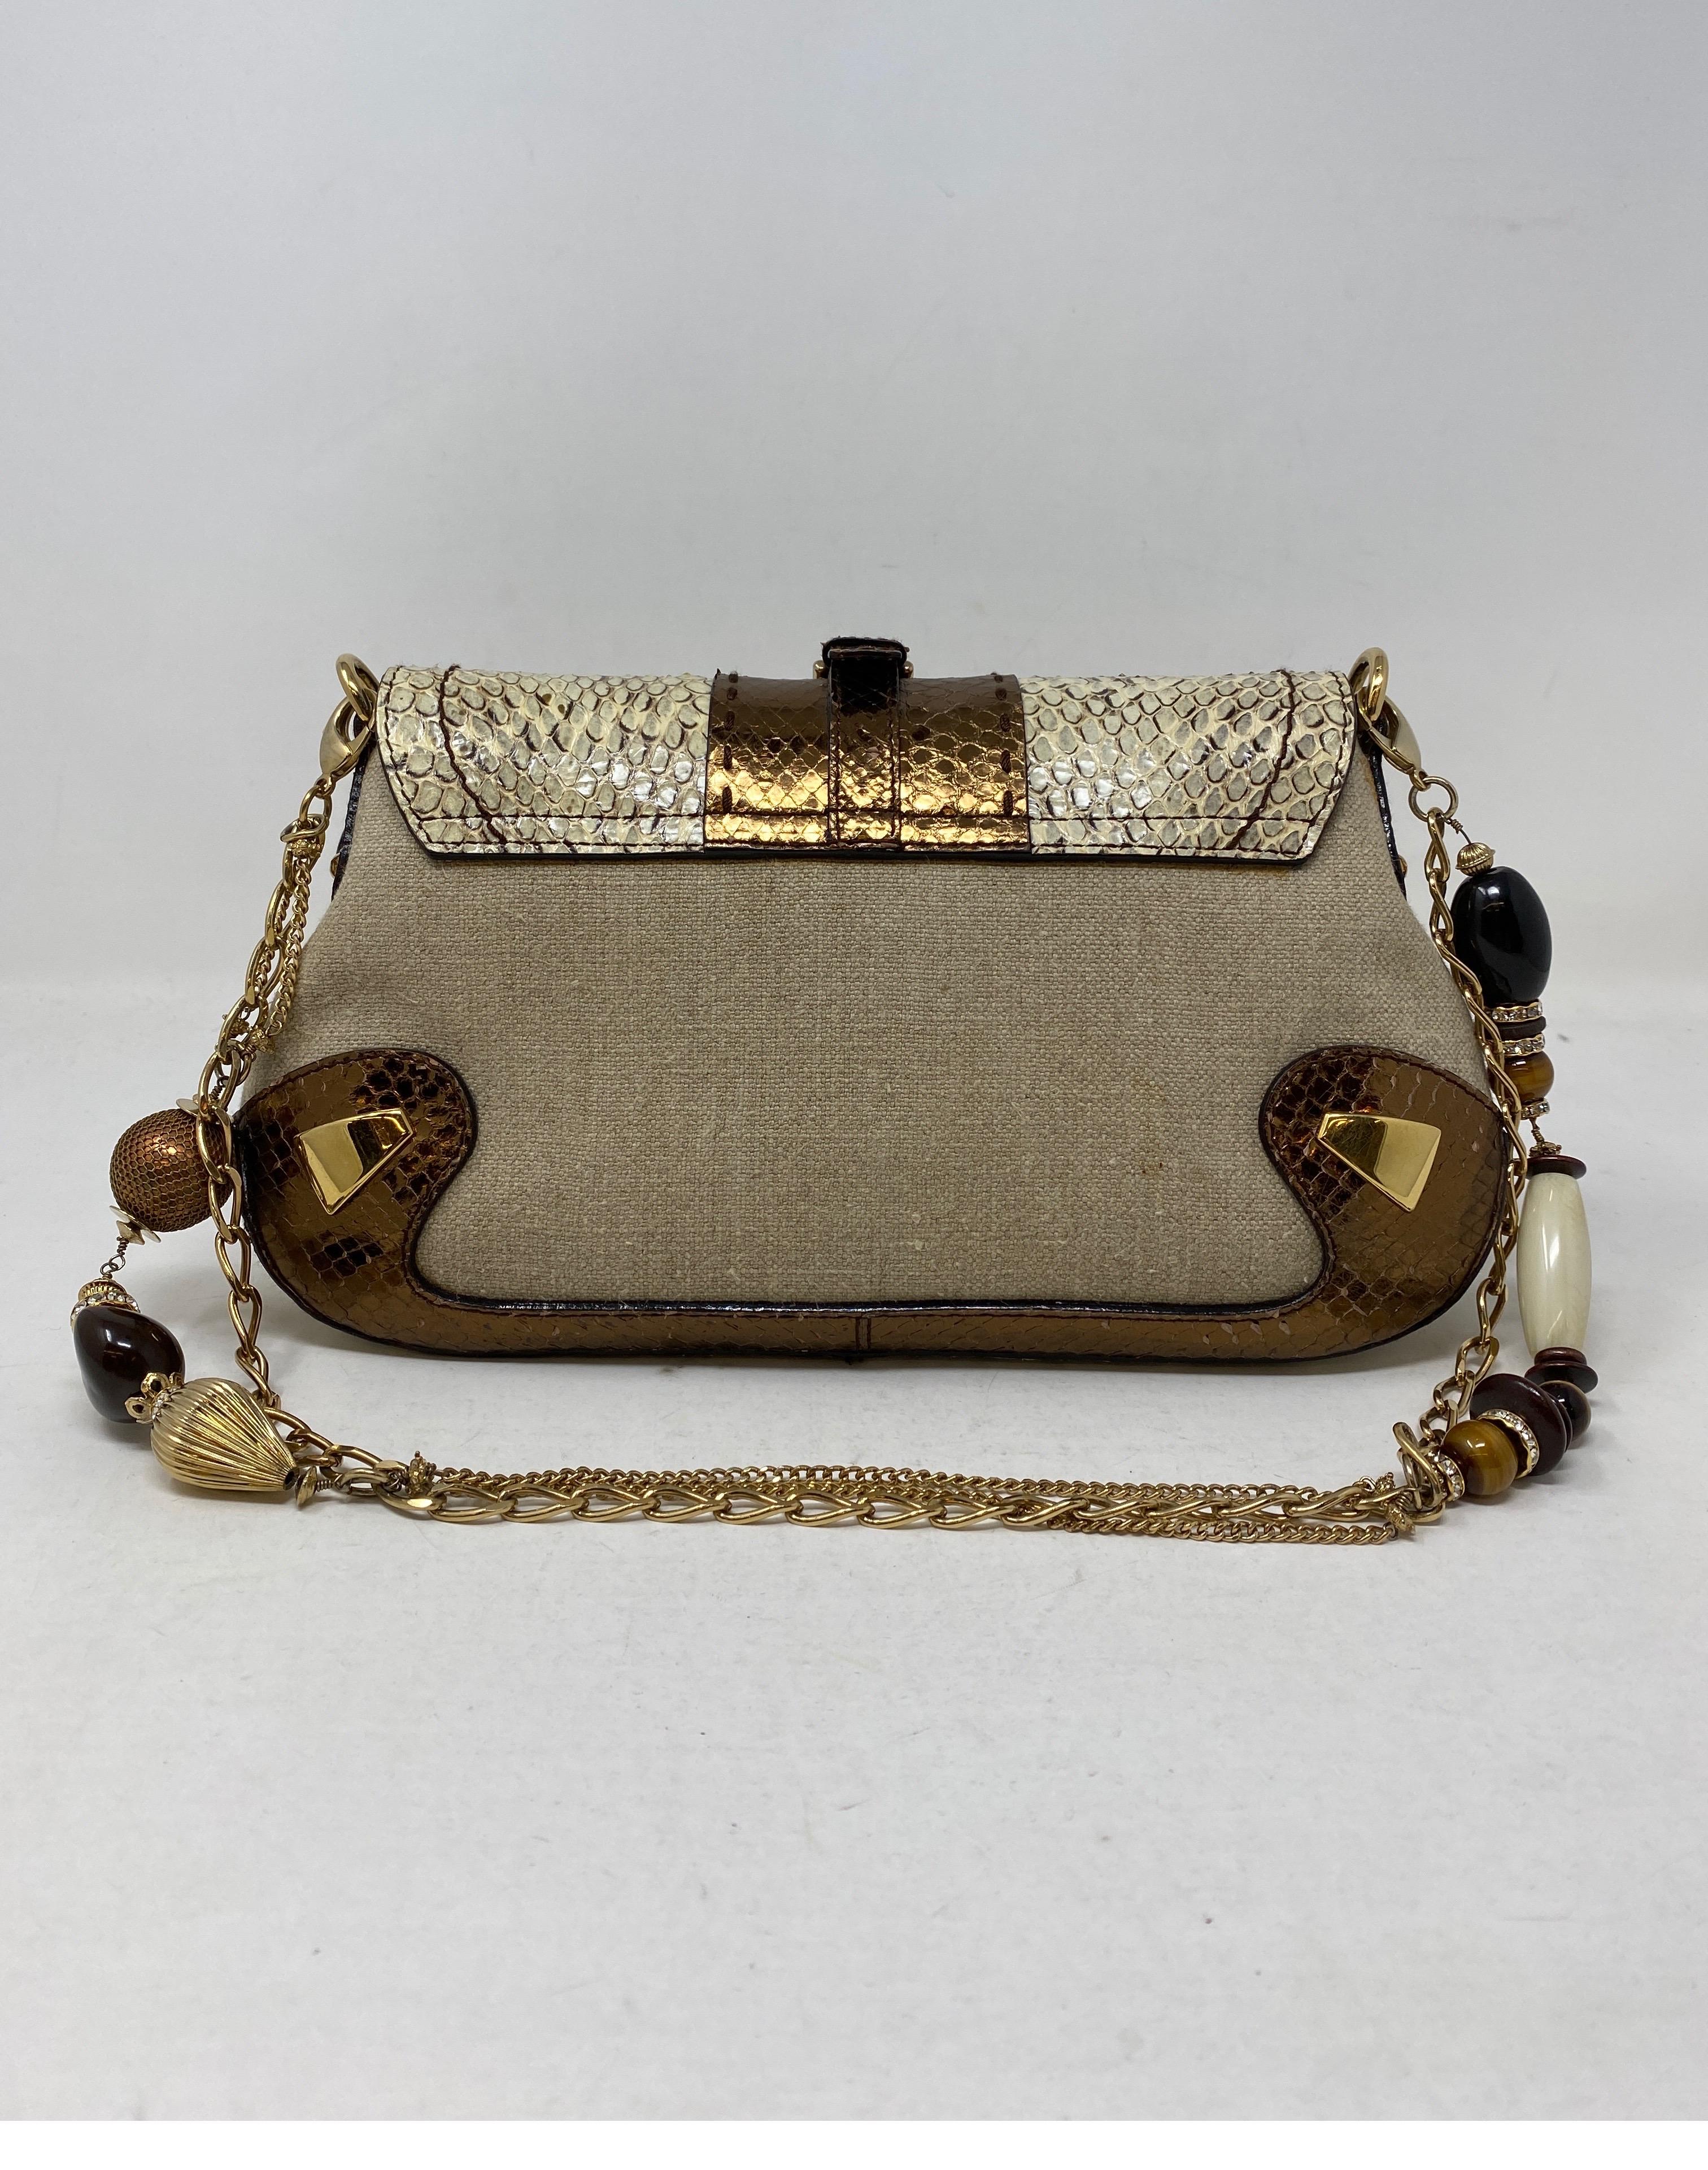 Dolce and Gabbana Python and Leather Bag. Canvas linen cloth bag with leather details. Unique gold chain with balls and ornaments. Mint condition. Can be worn as a clutch or as a shoulder bag. Gift worthy bag. Guaranteed authentic. 